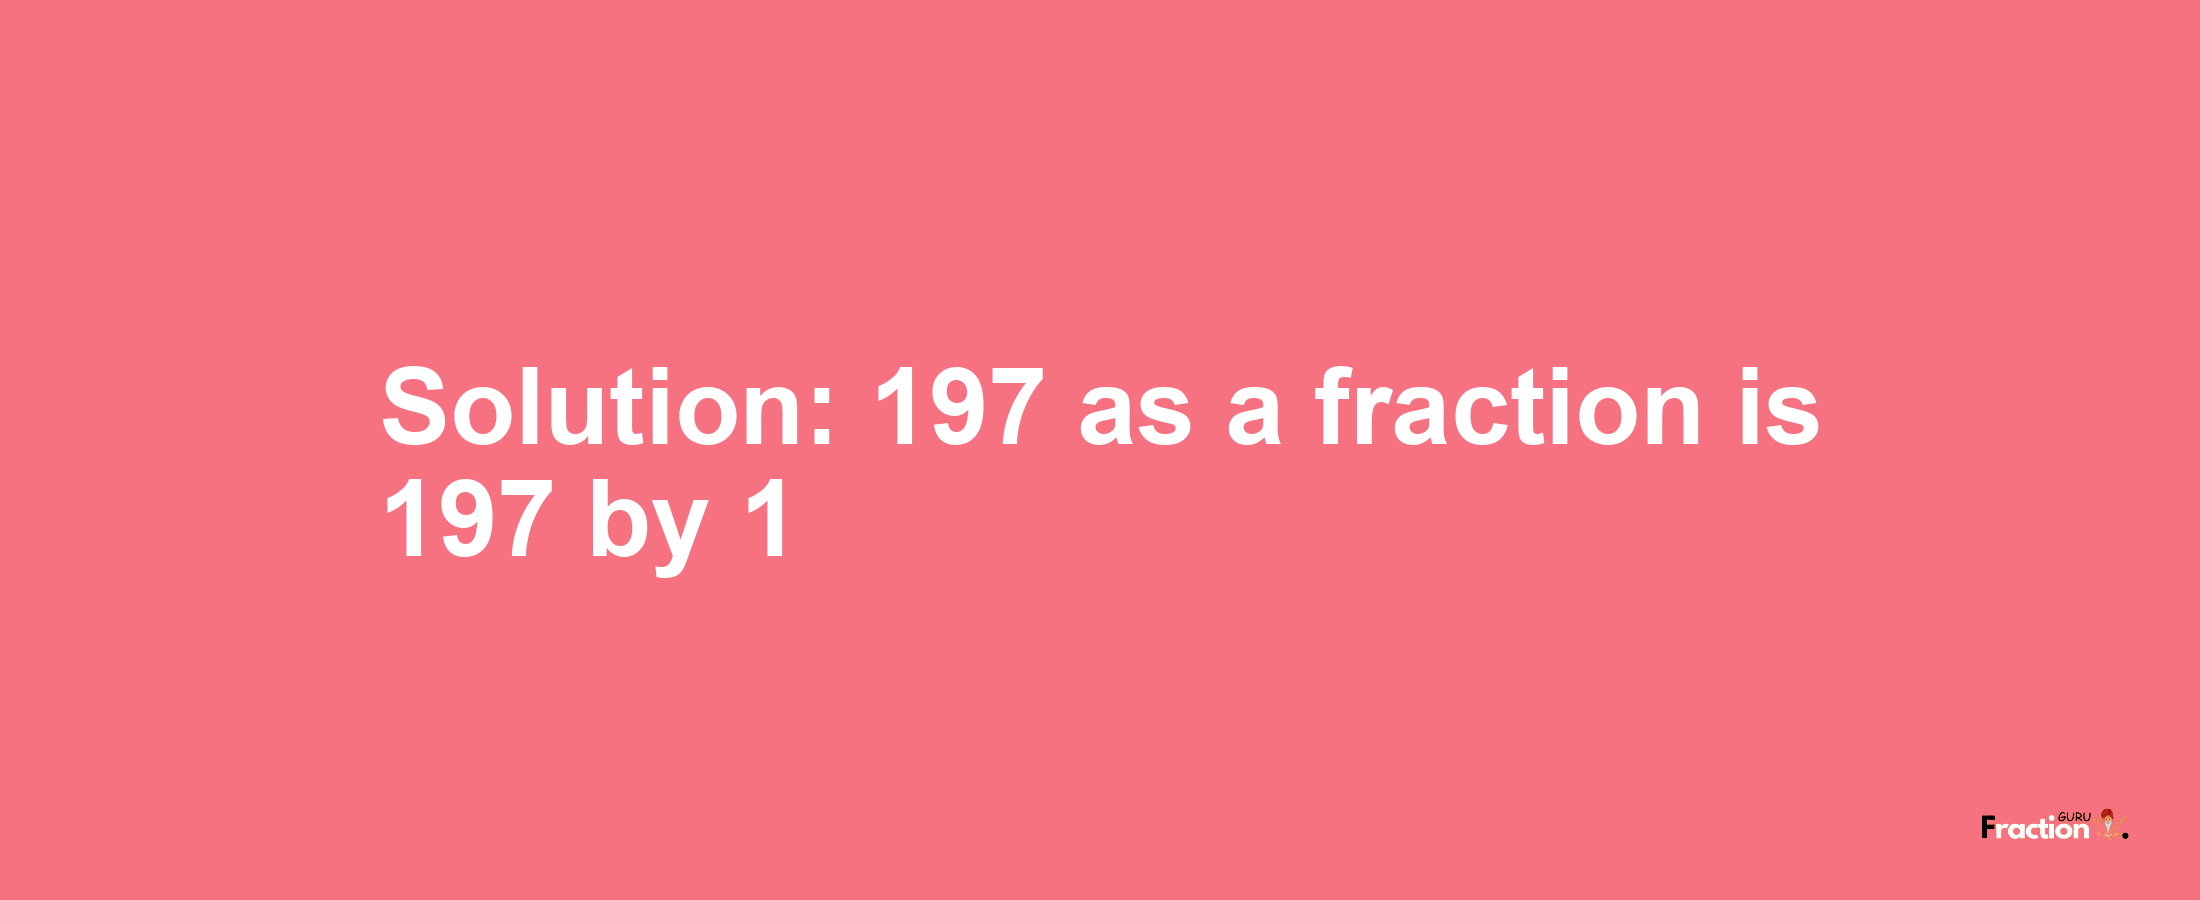 Solution:197 as a fraction is 197/1